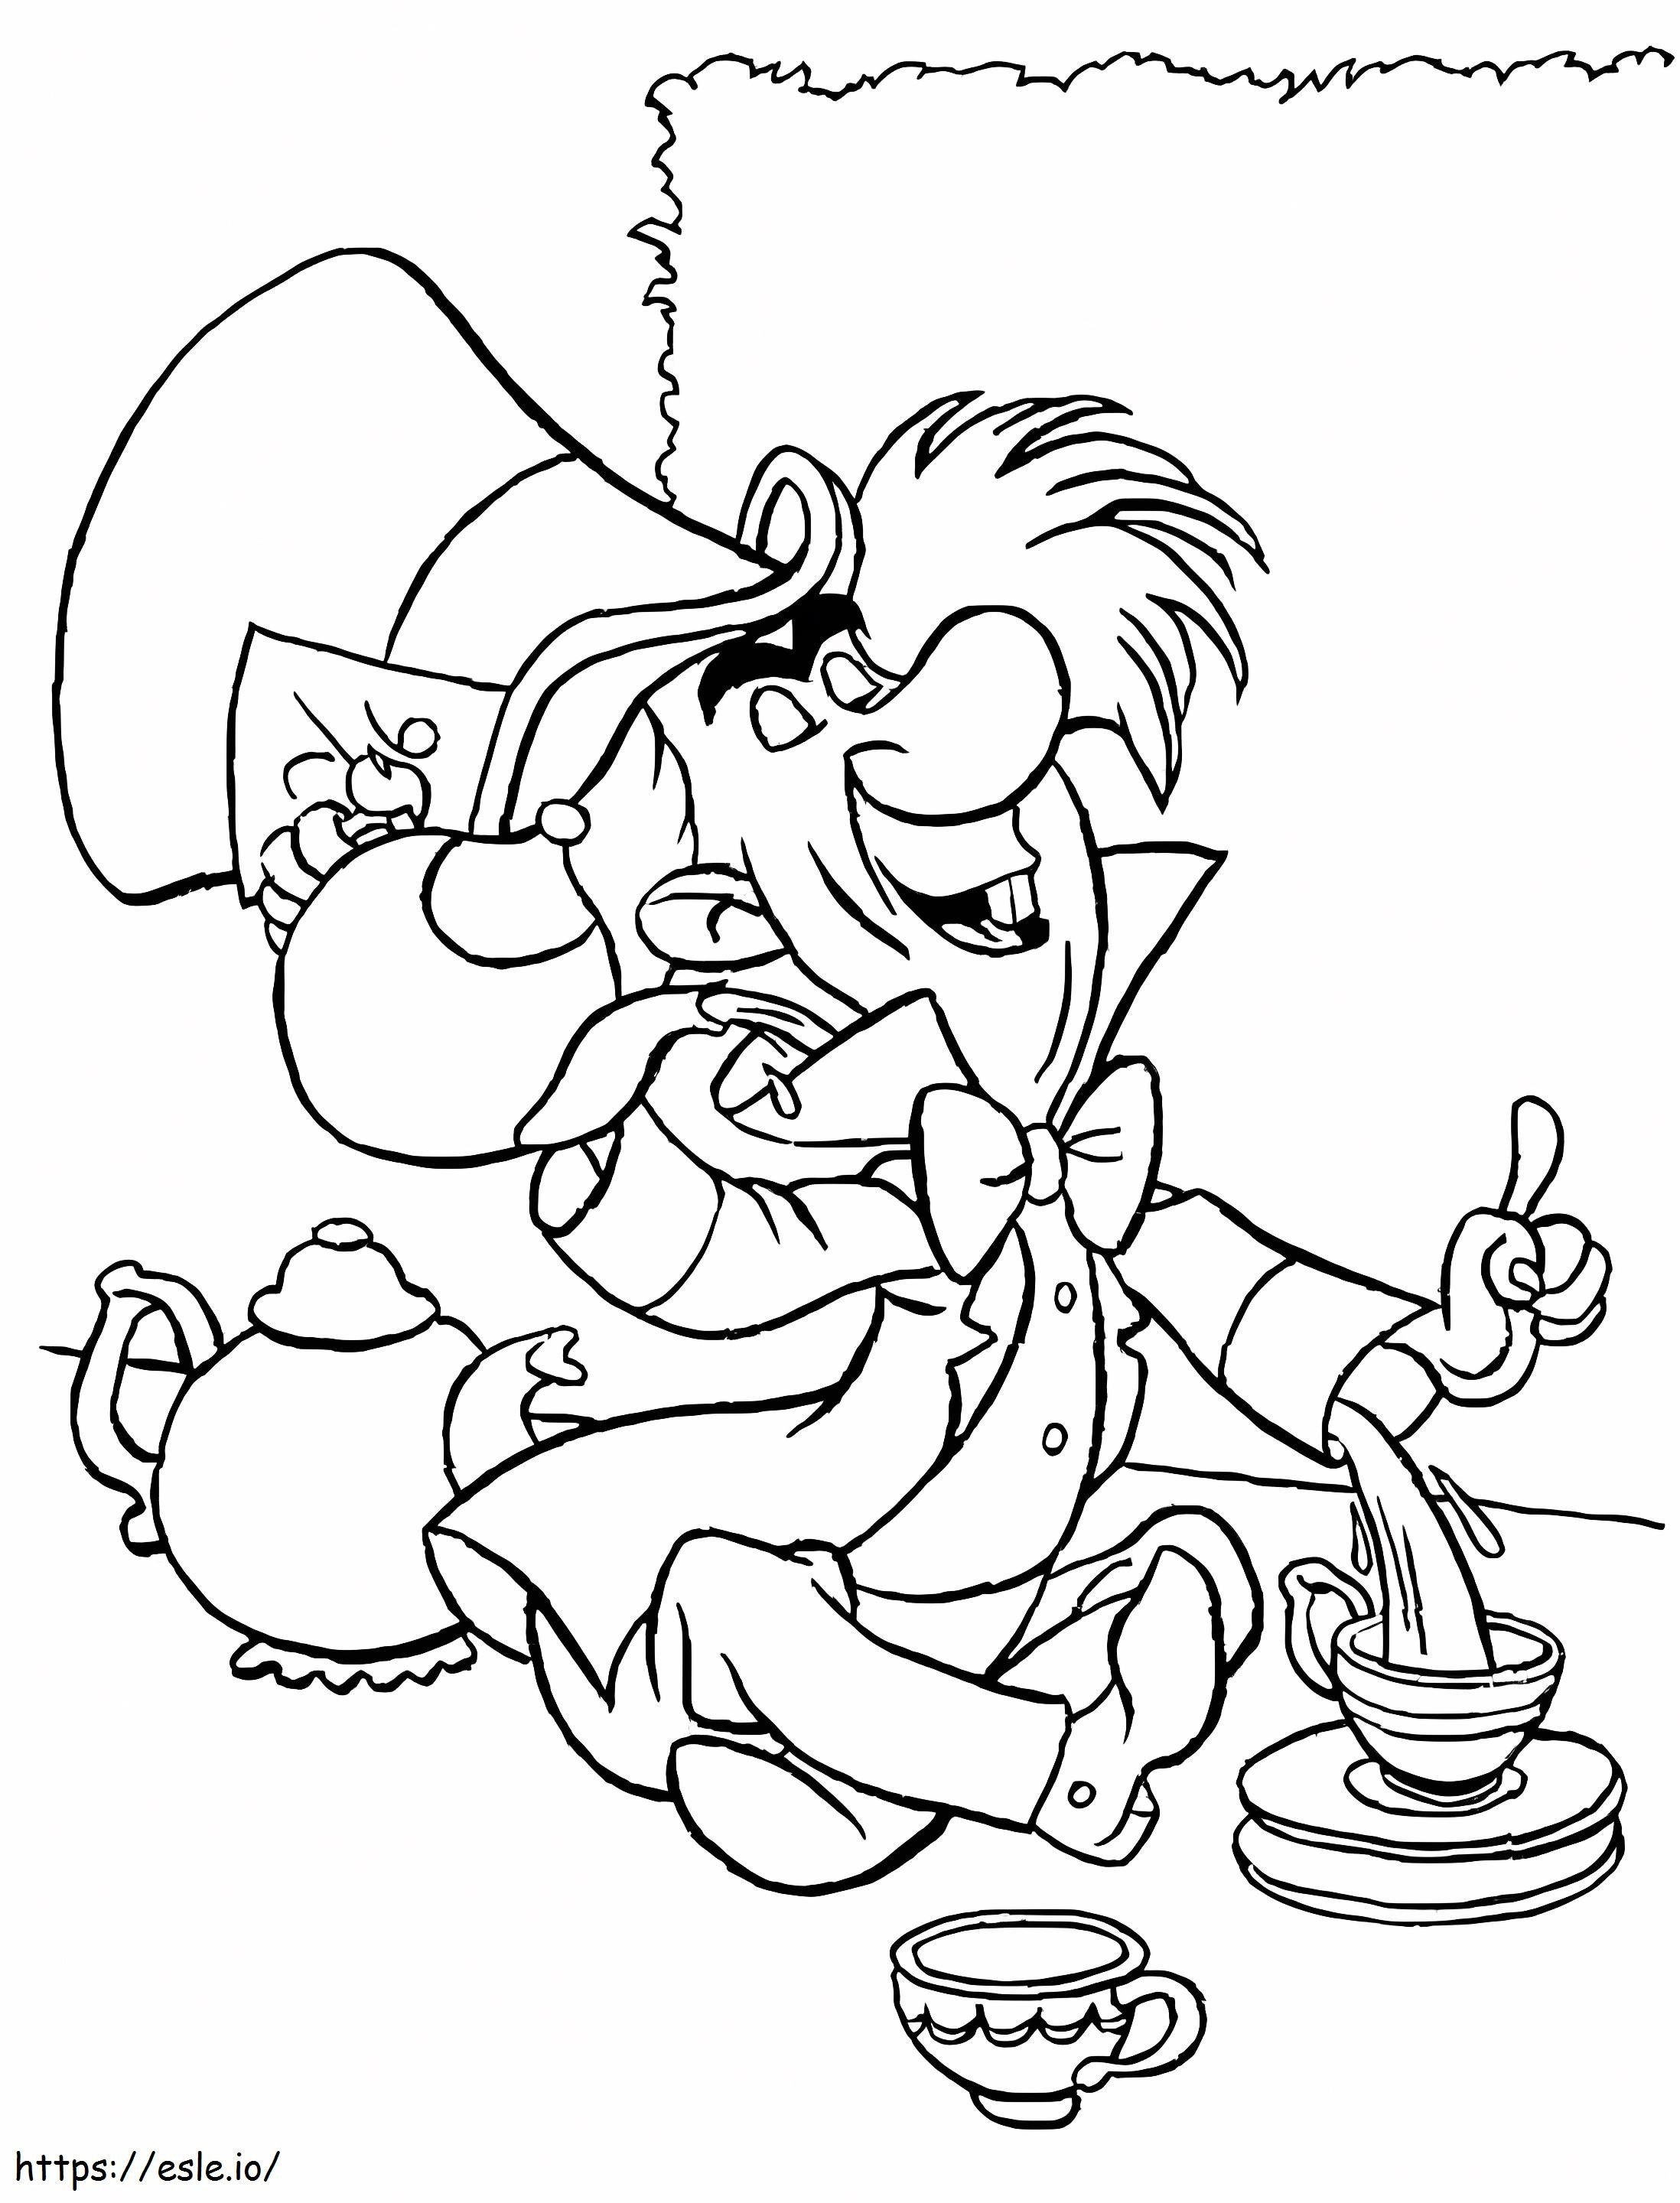 Mad Hatter From Alice In Wonderland coloring page